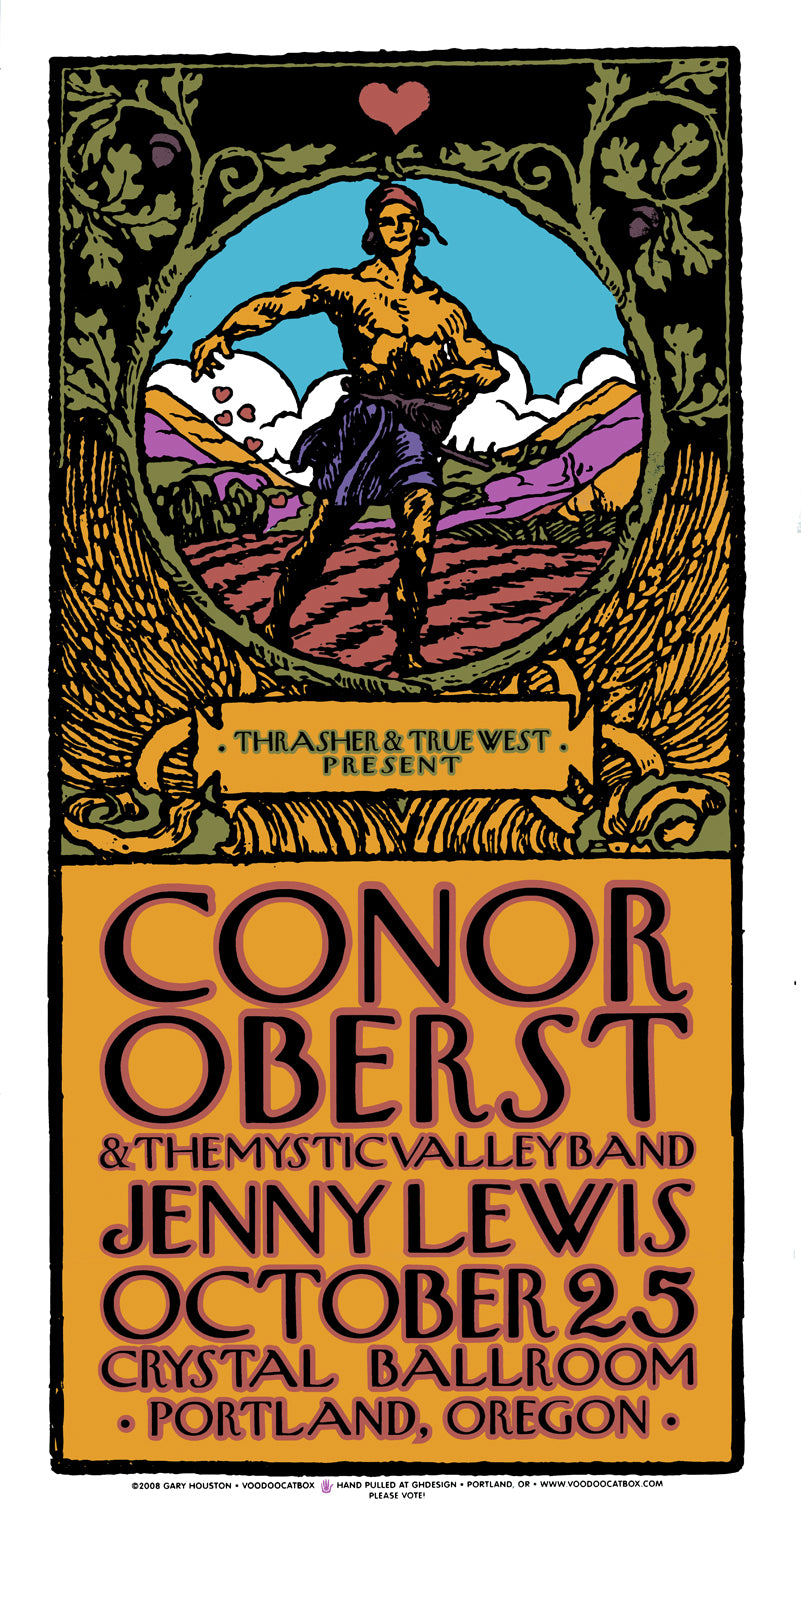 Conor Oberst & The Mystic Valley Band